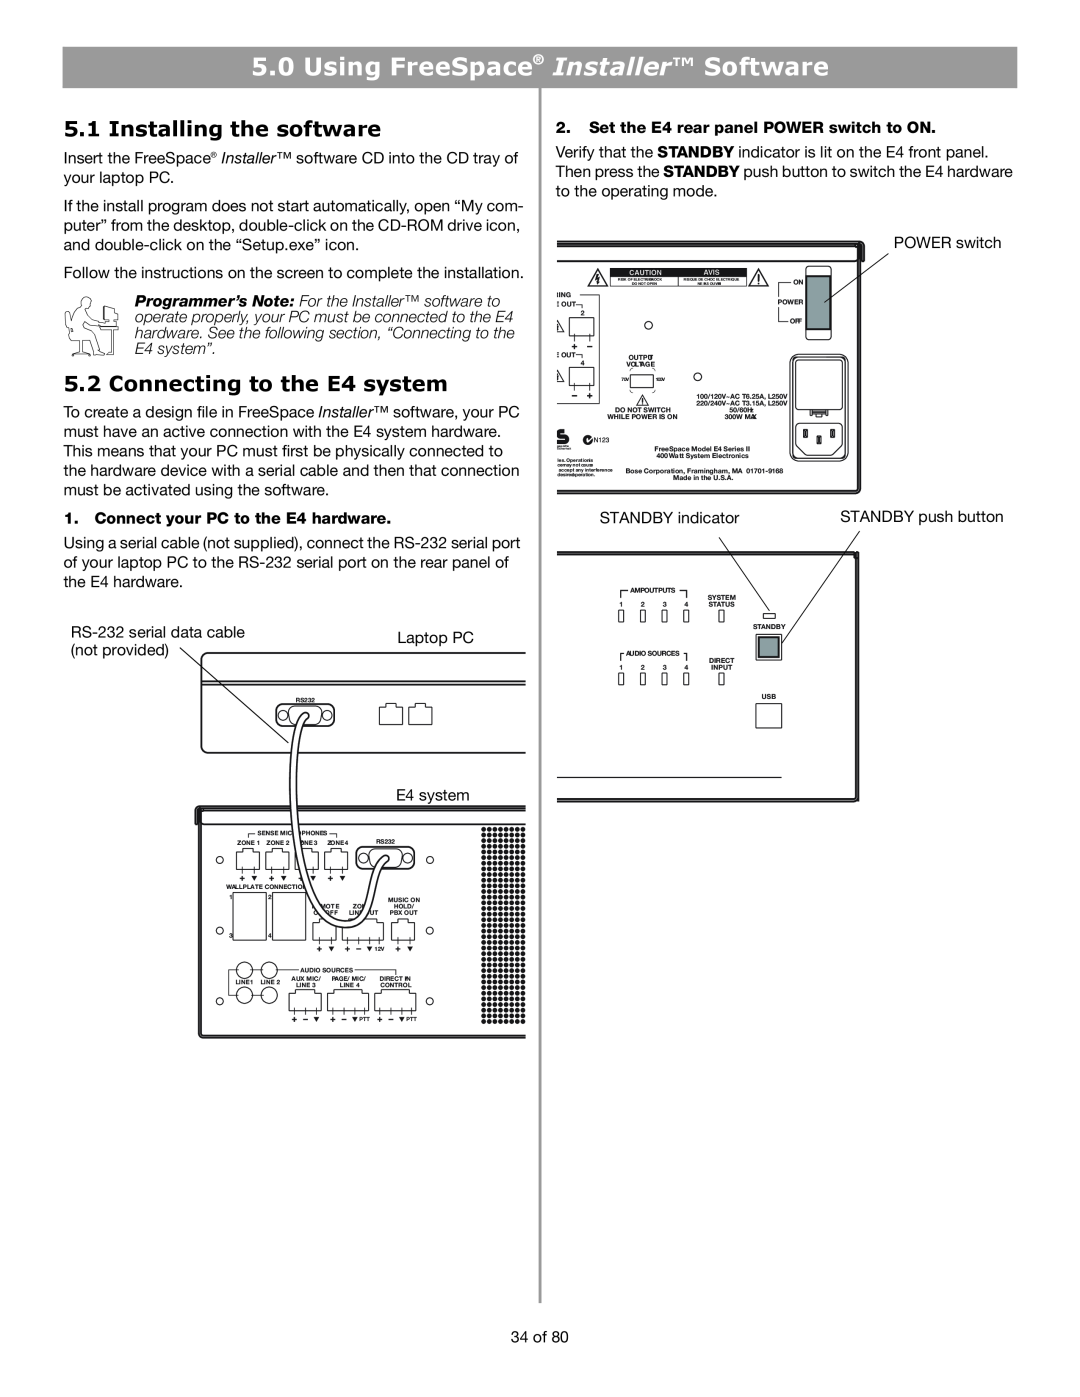 Bose manual Using FreeSpace Installer Software, Installing the software, Connecting to the E4 system 